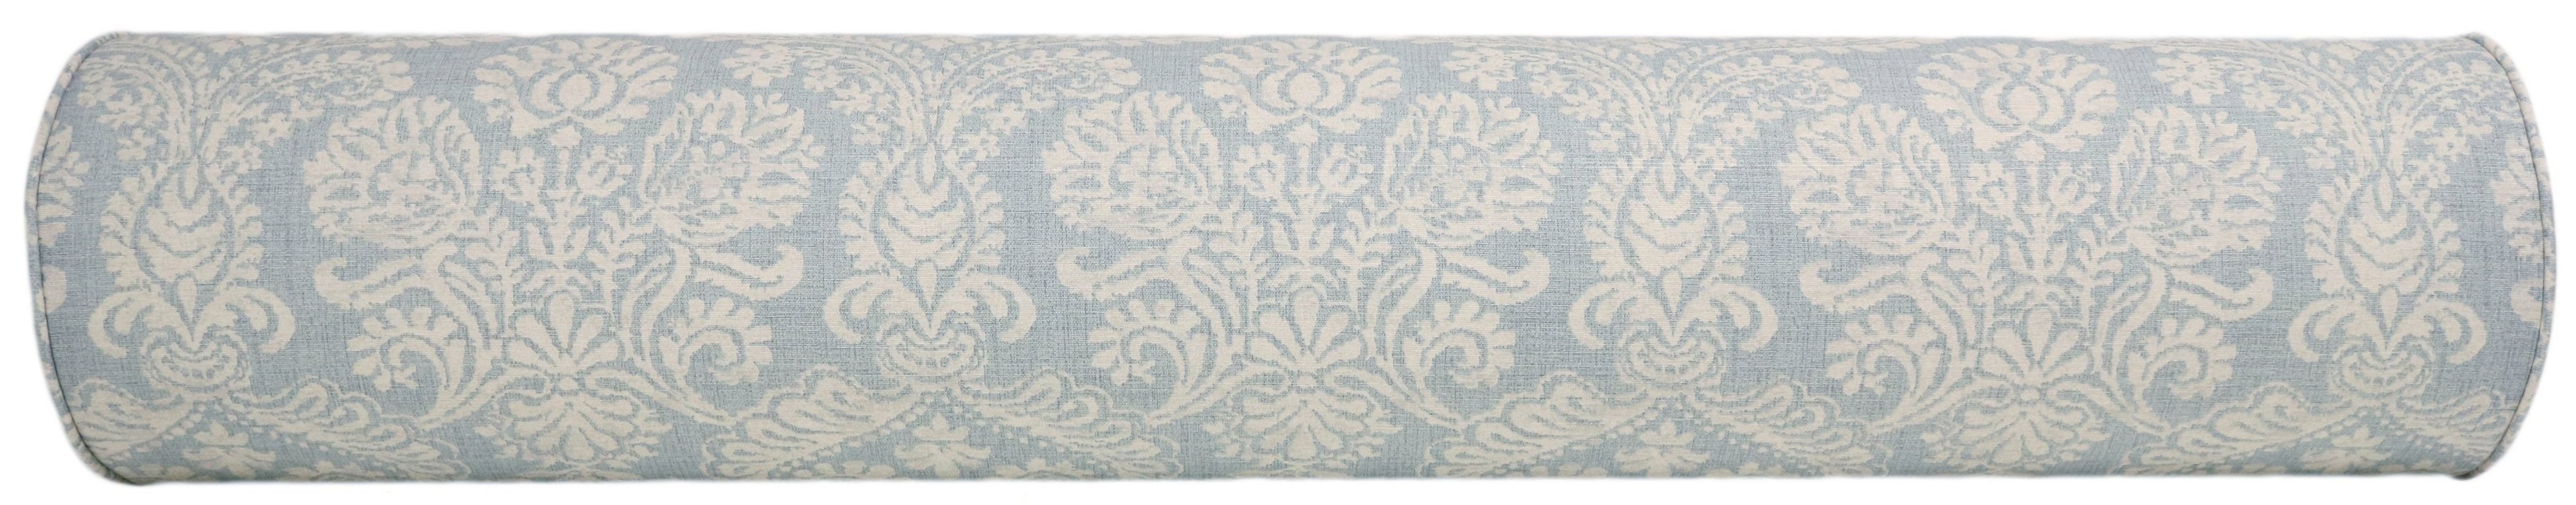 The Bolster :: French Damask Print // Sky Blue - KING // 9" X 48" - Image 2